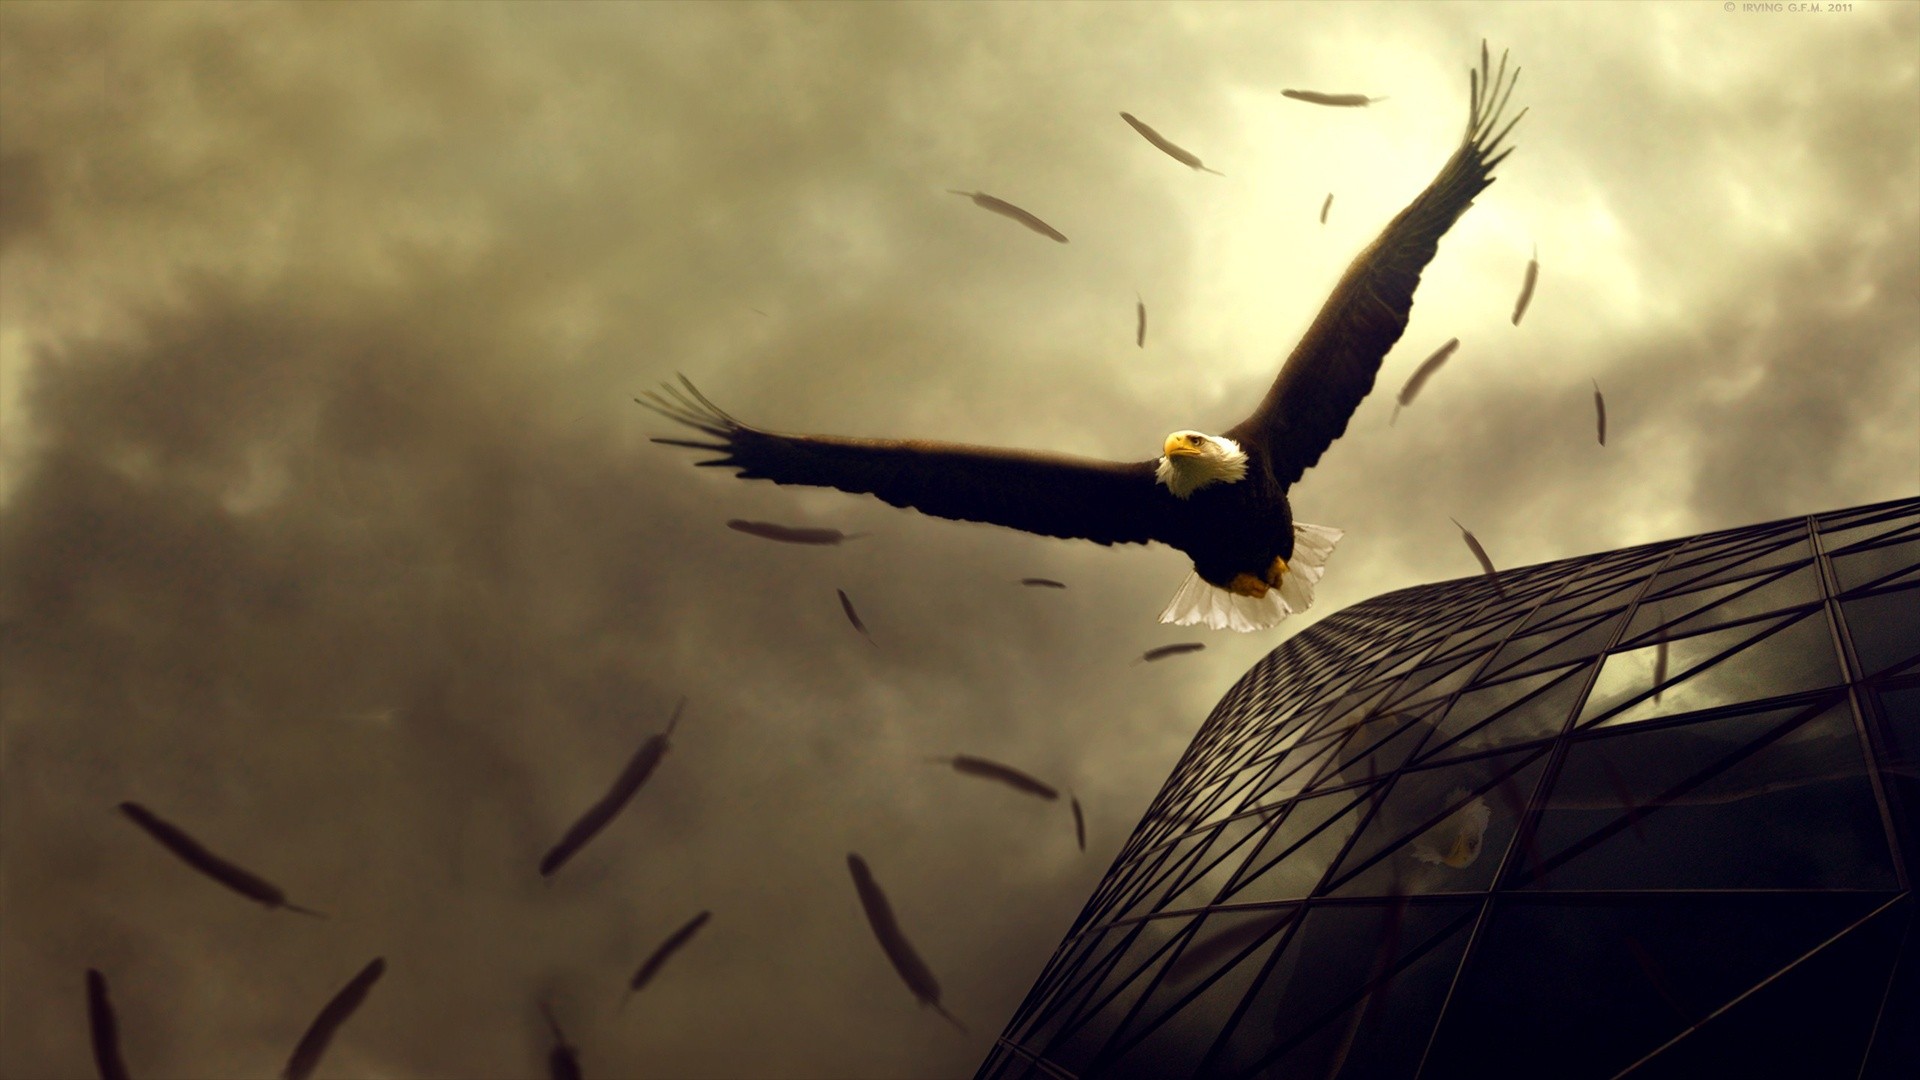 General 1920x1080 eagle building birds feathers photo manipulation animals worm's eye view wings